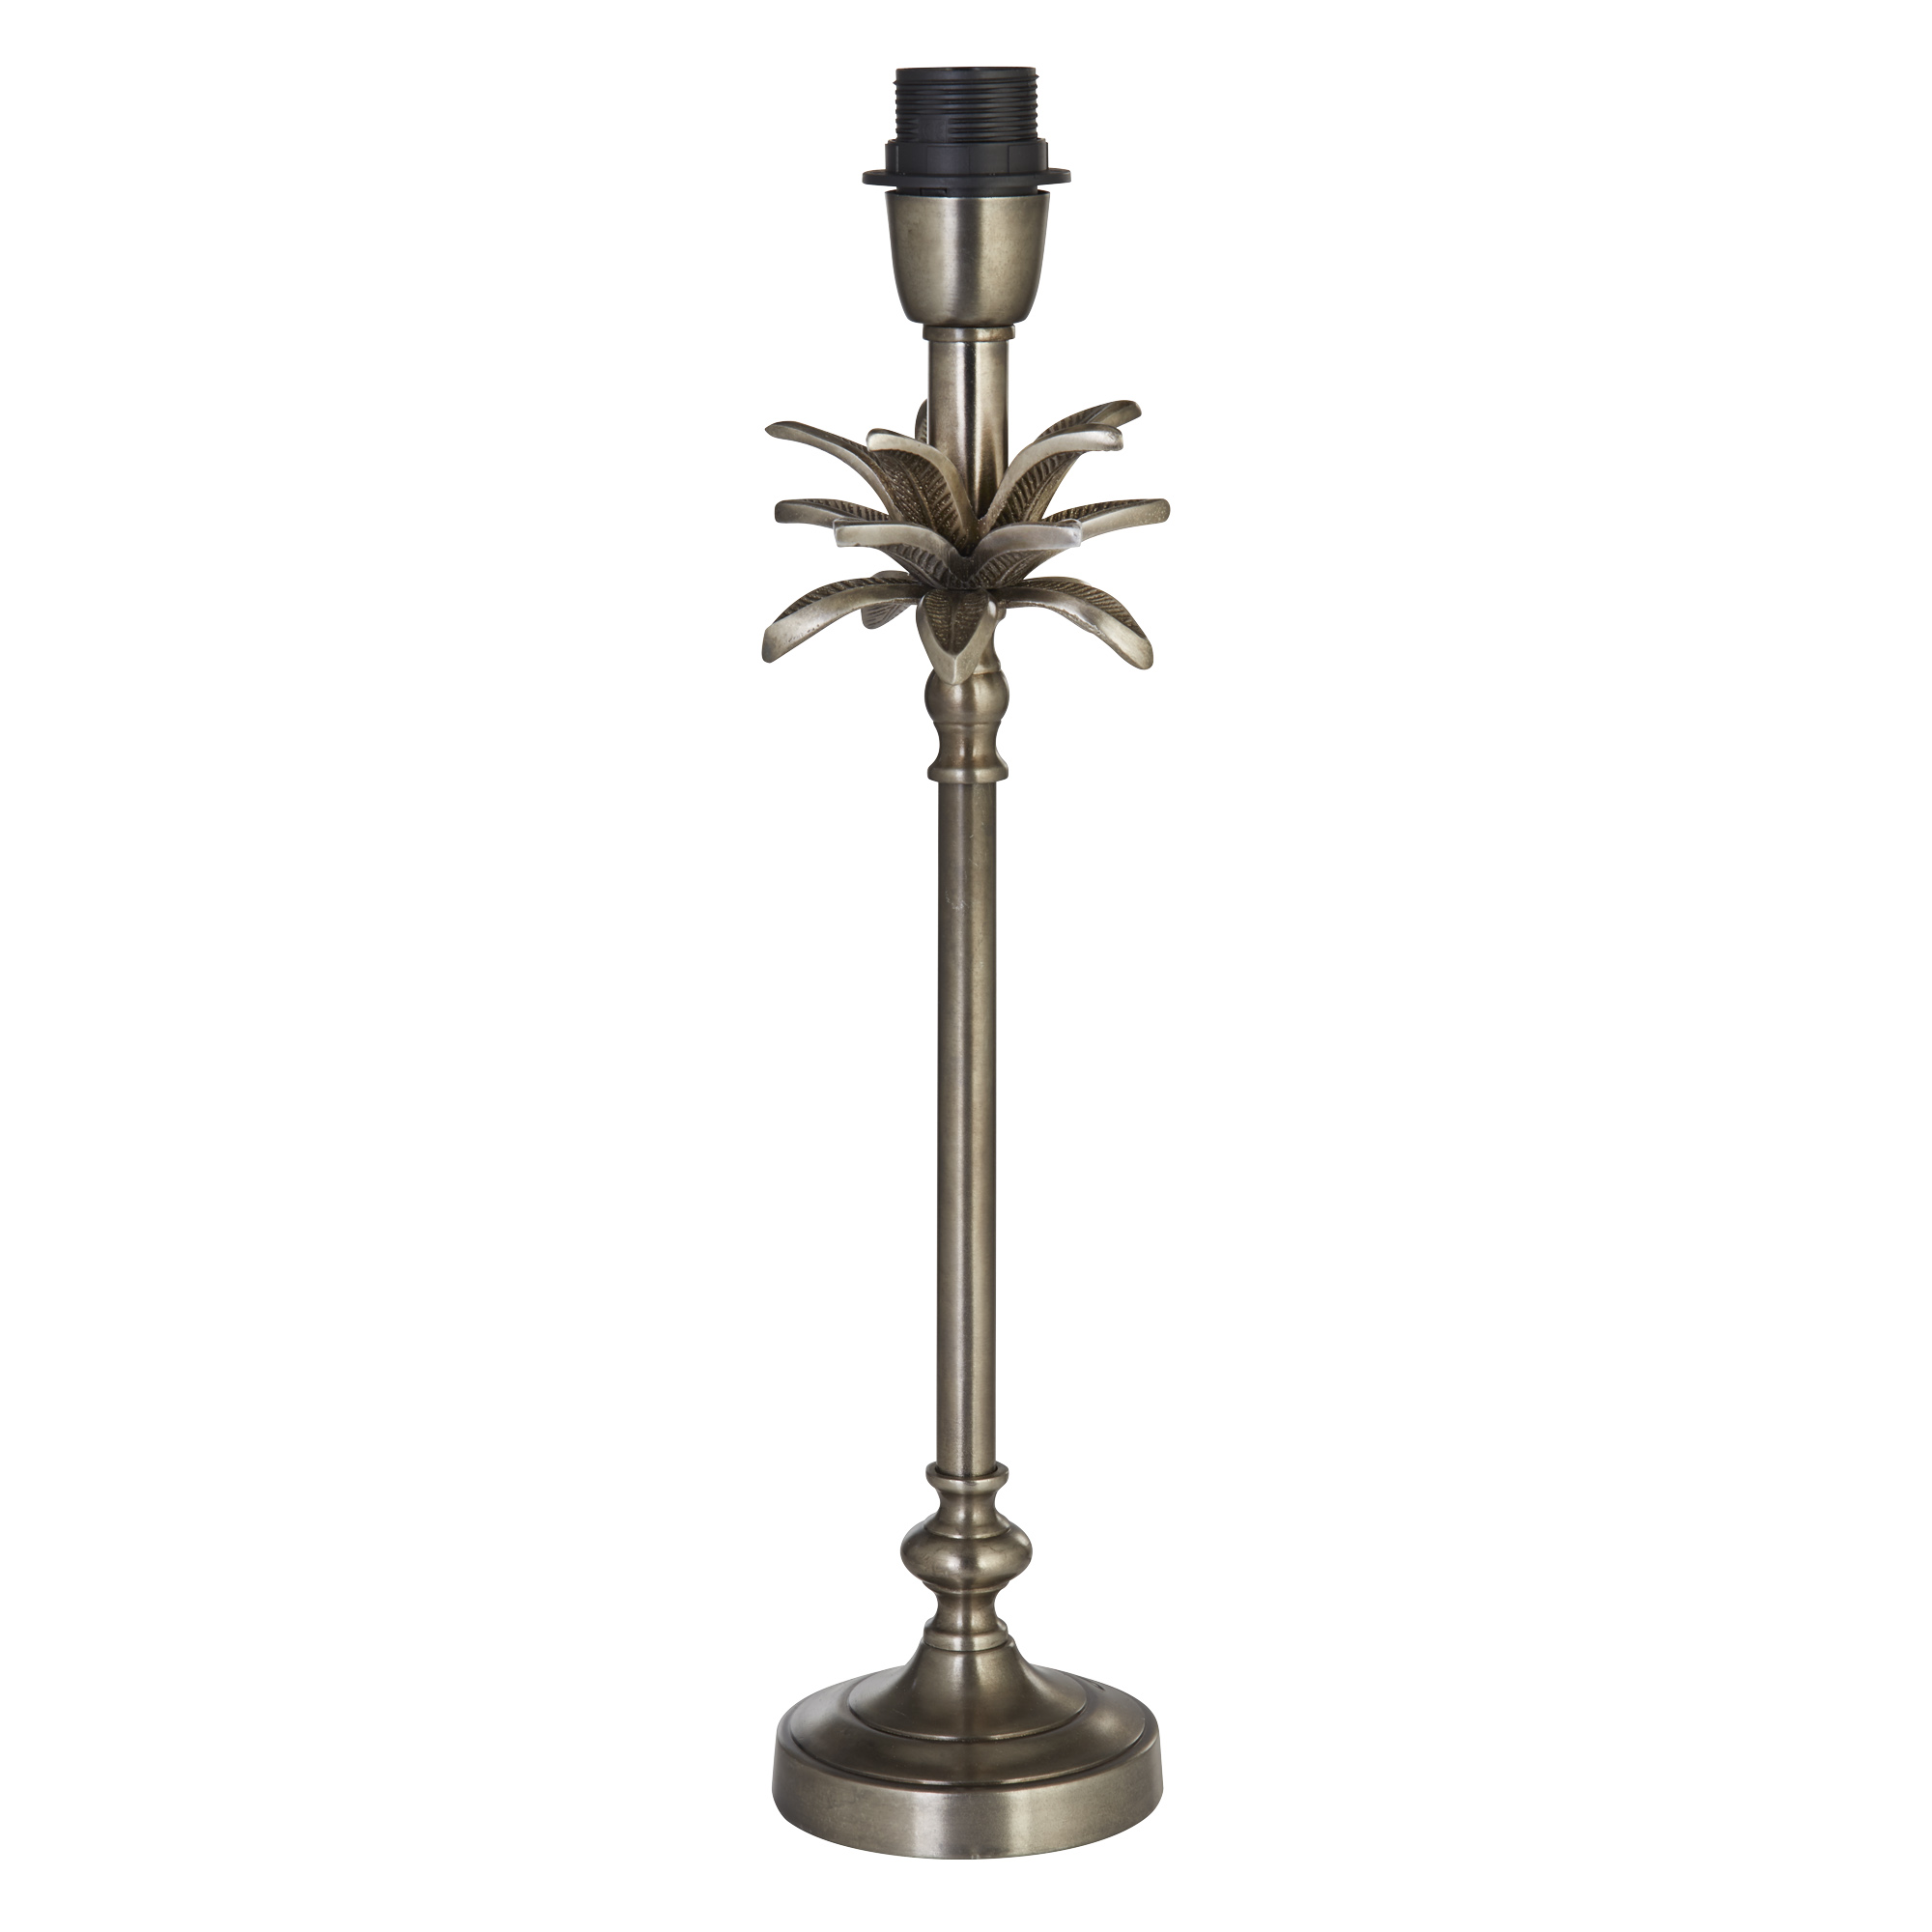 Base Only - Palm Table Lamp - Antique Nickel